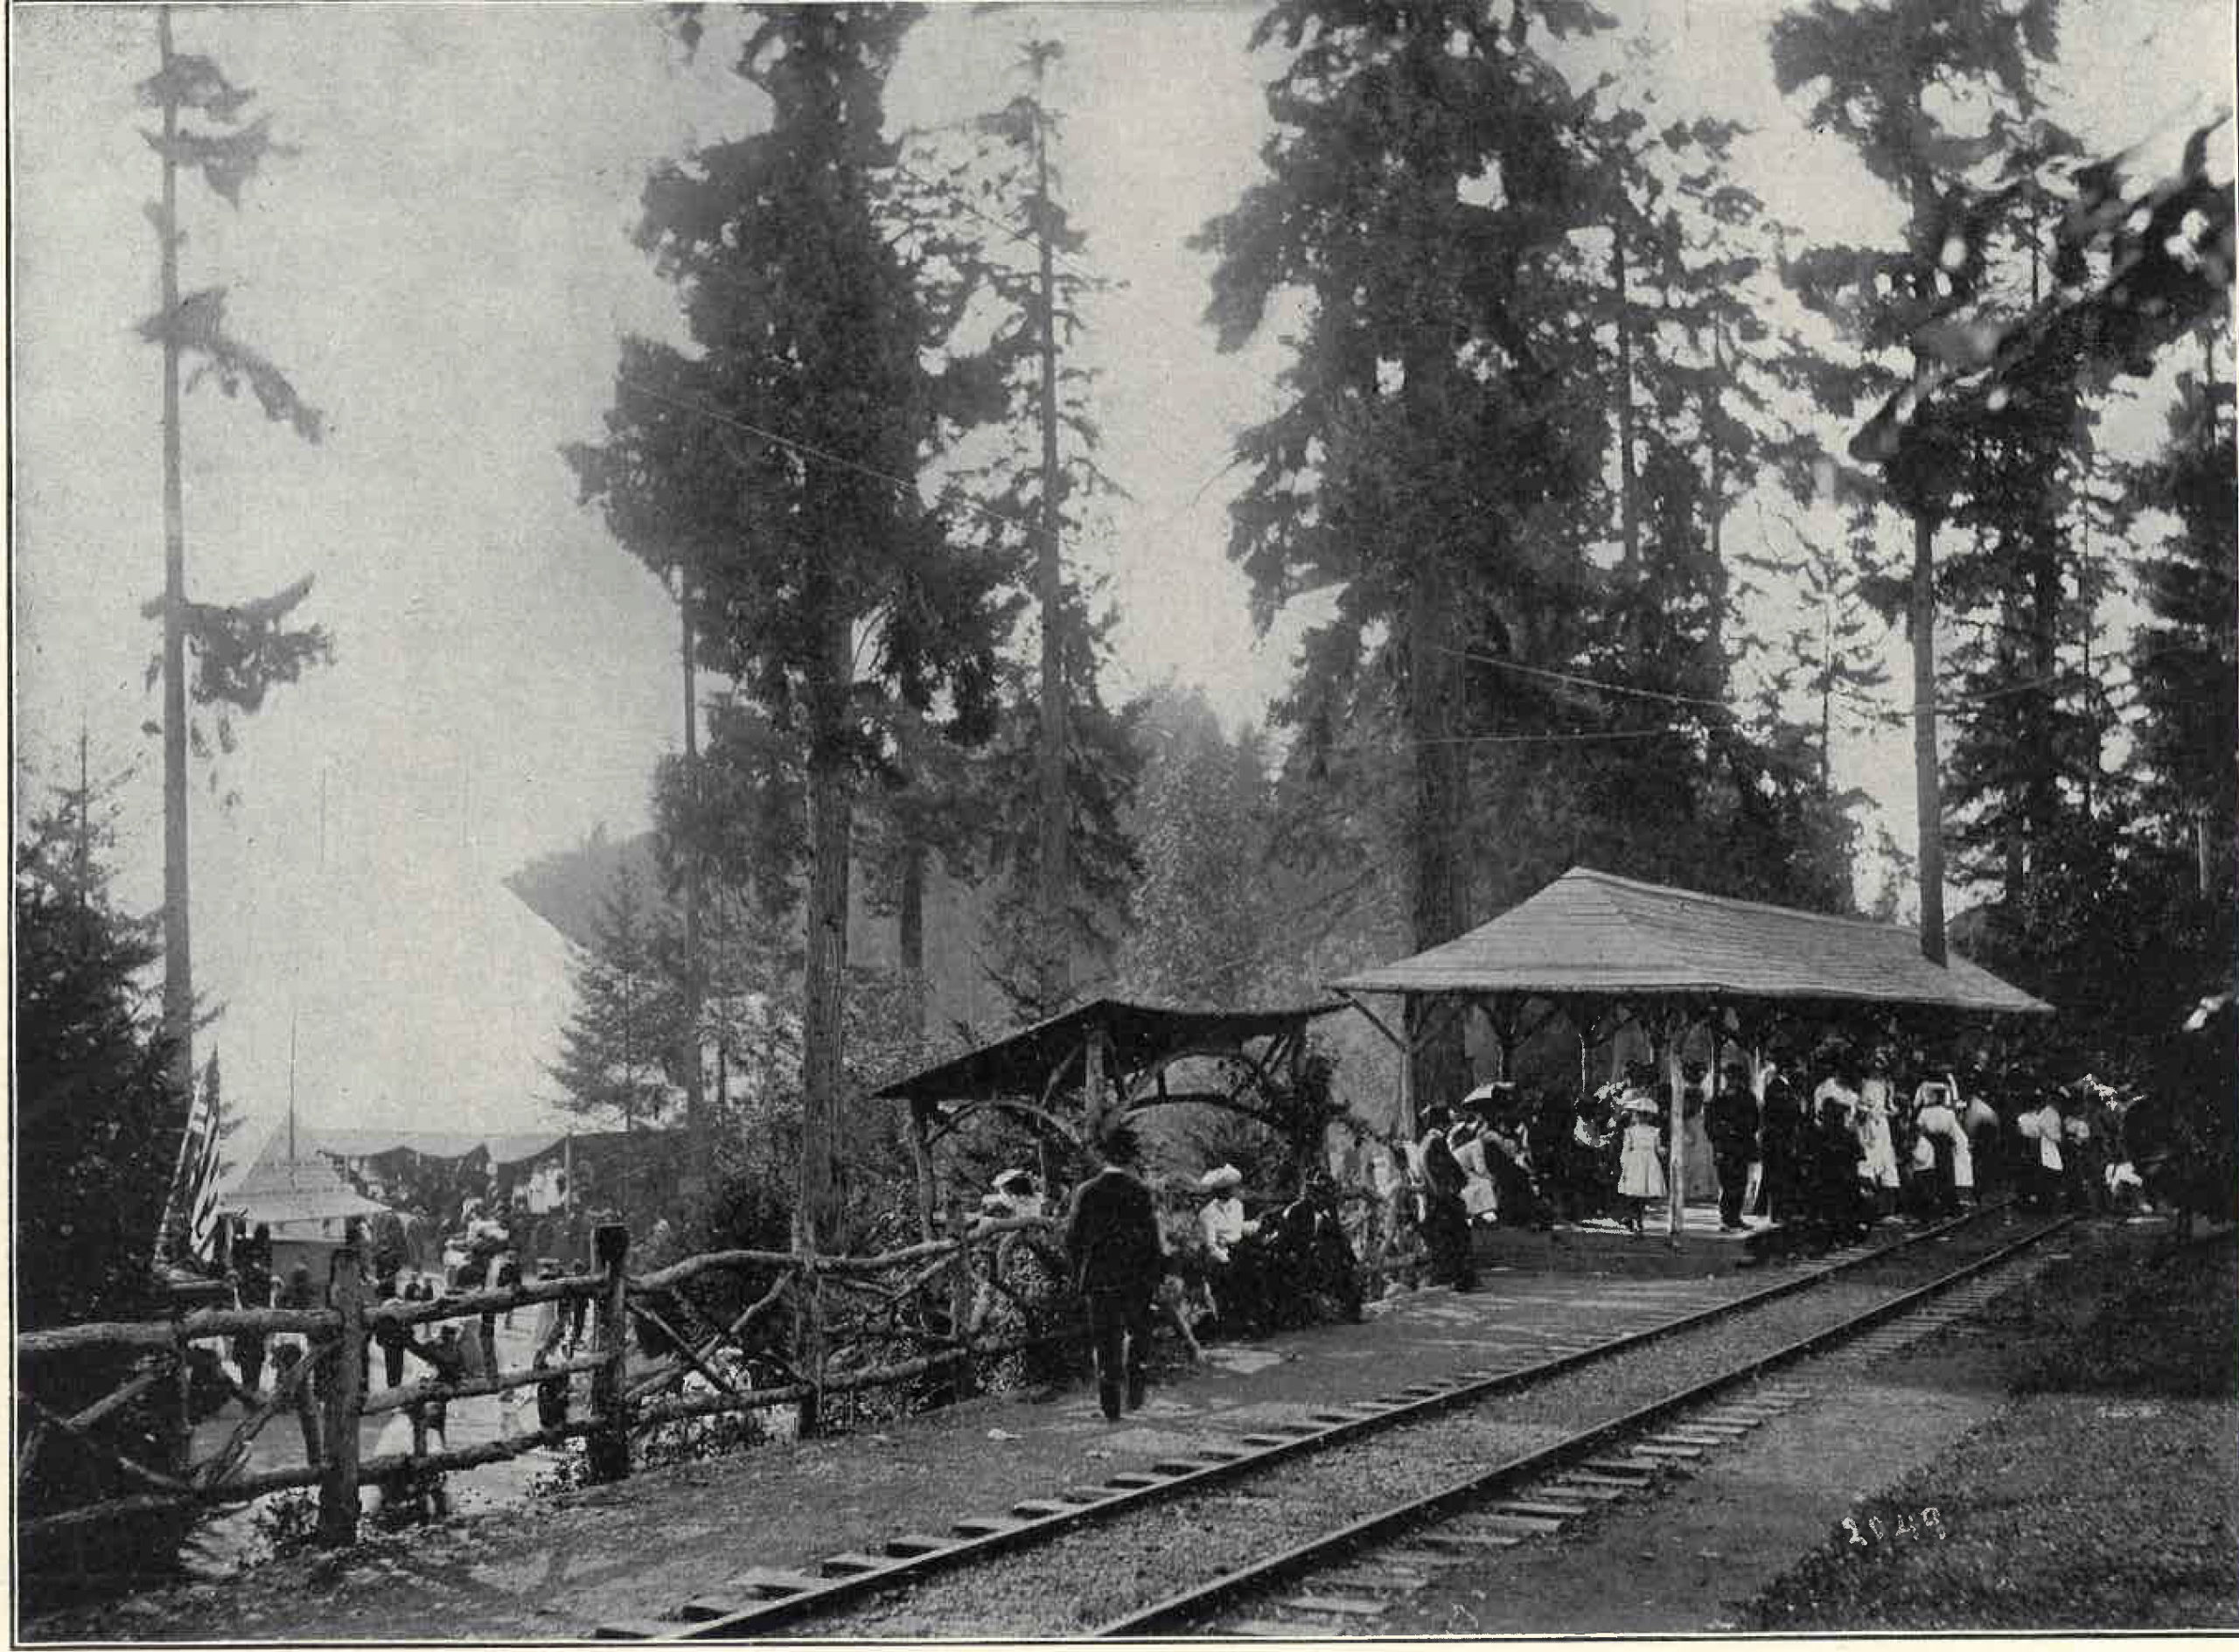 One hundred years ago, until the late 1930s, Tacoma residents could take a train fromPt. Defiance to Spanaway Lake.